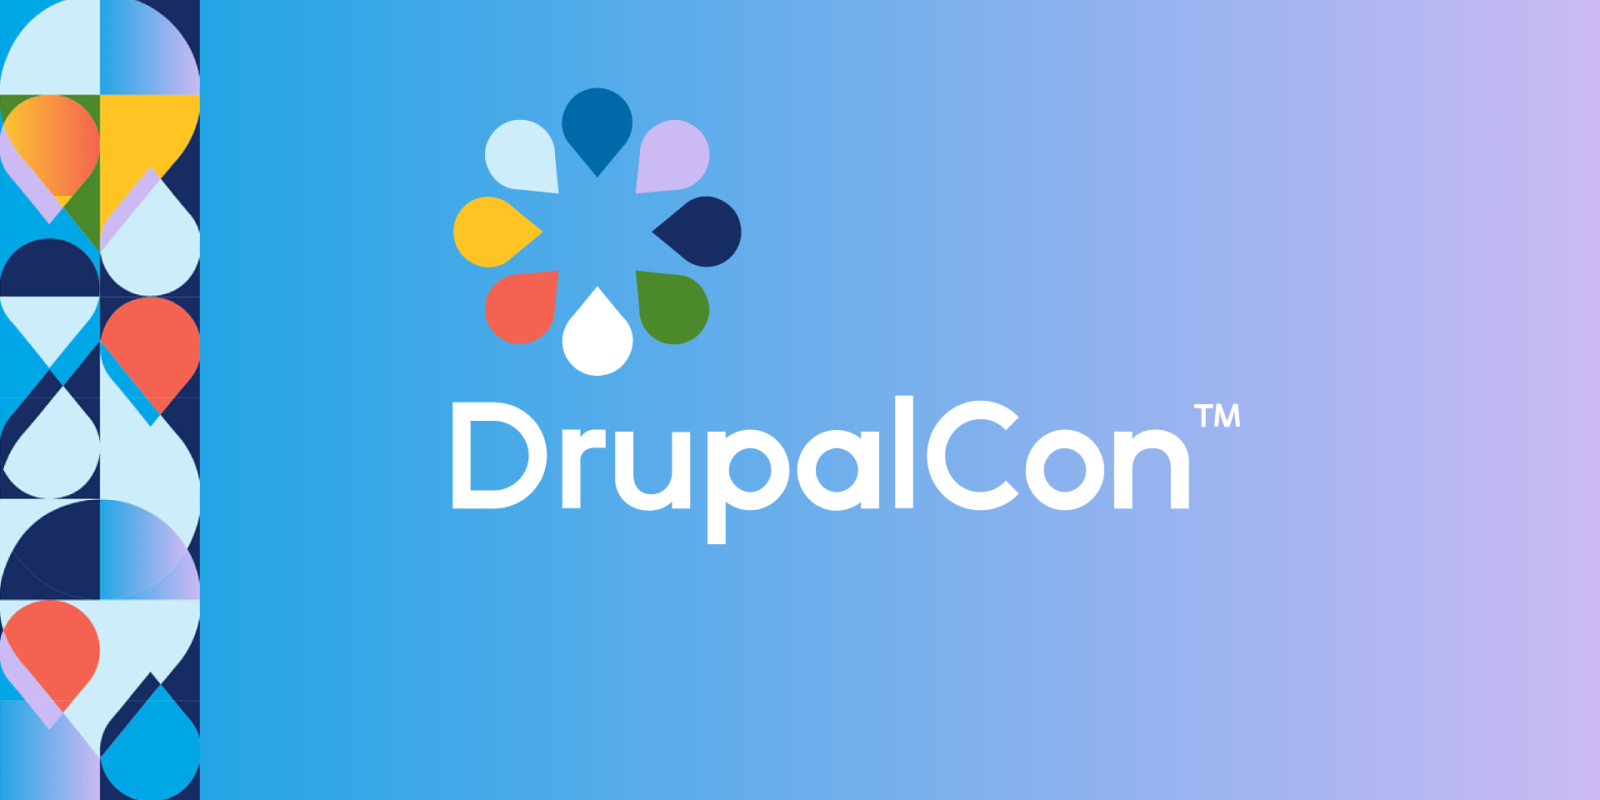 On medium blue to light purple gradient background: a blossom formed of multi-colored drops above the Word DrupalCon (TM)